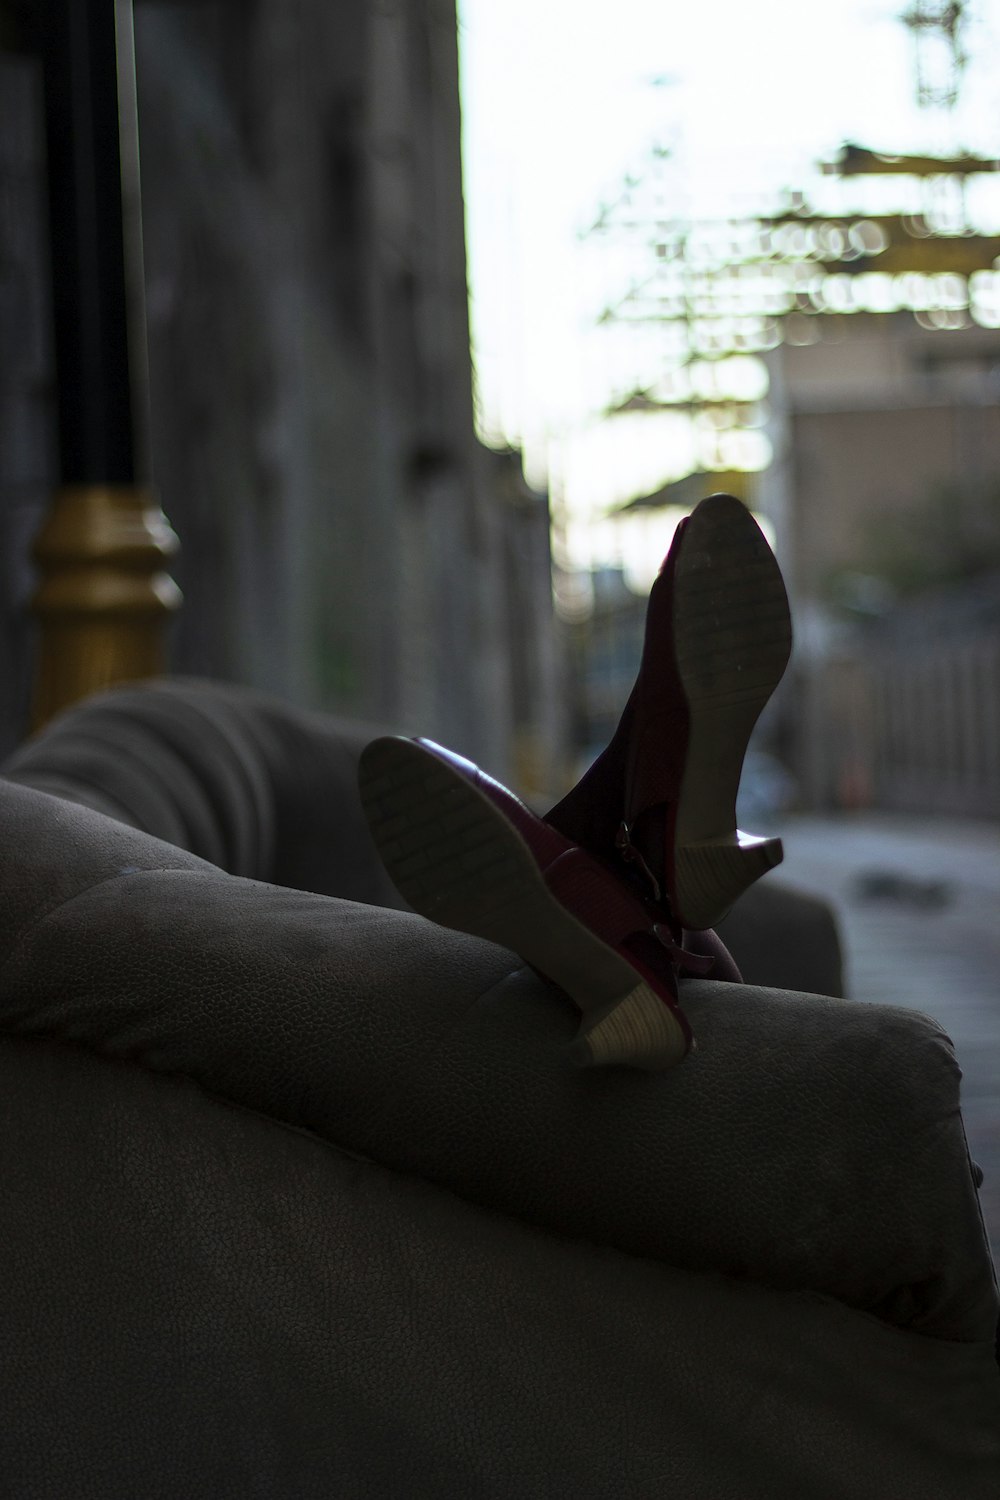 a close up of a pair of shoes on a couch